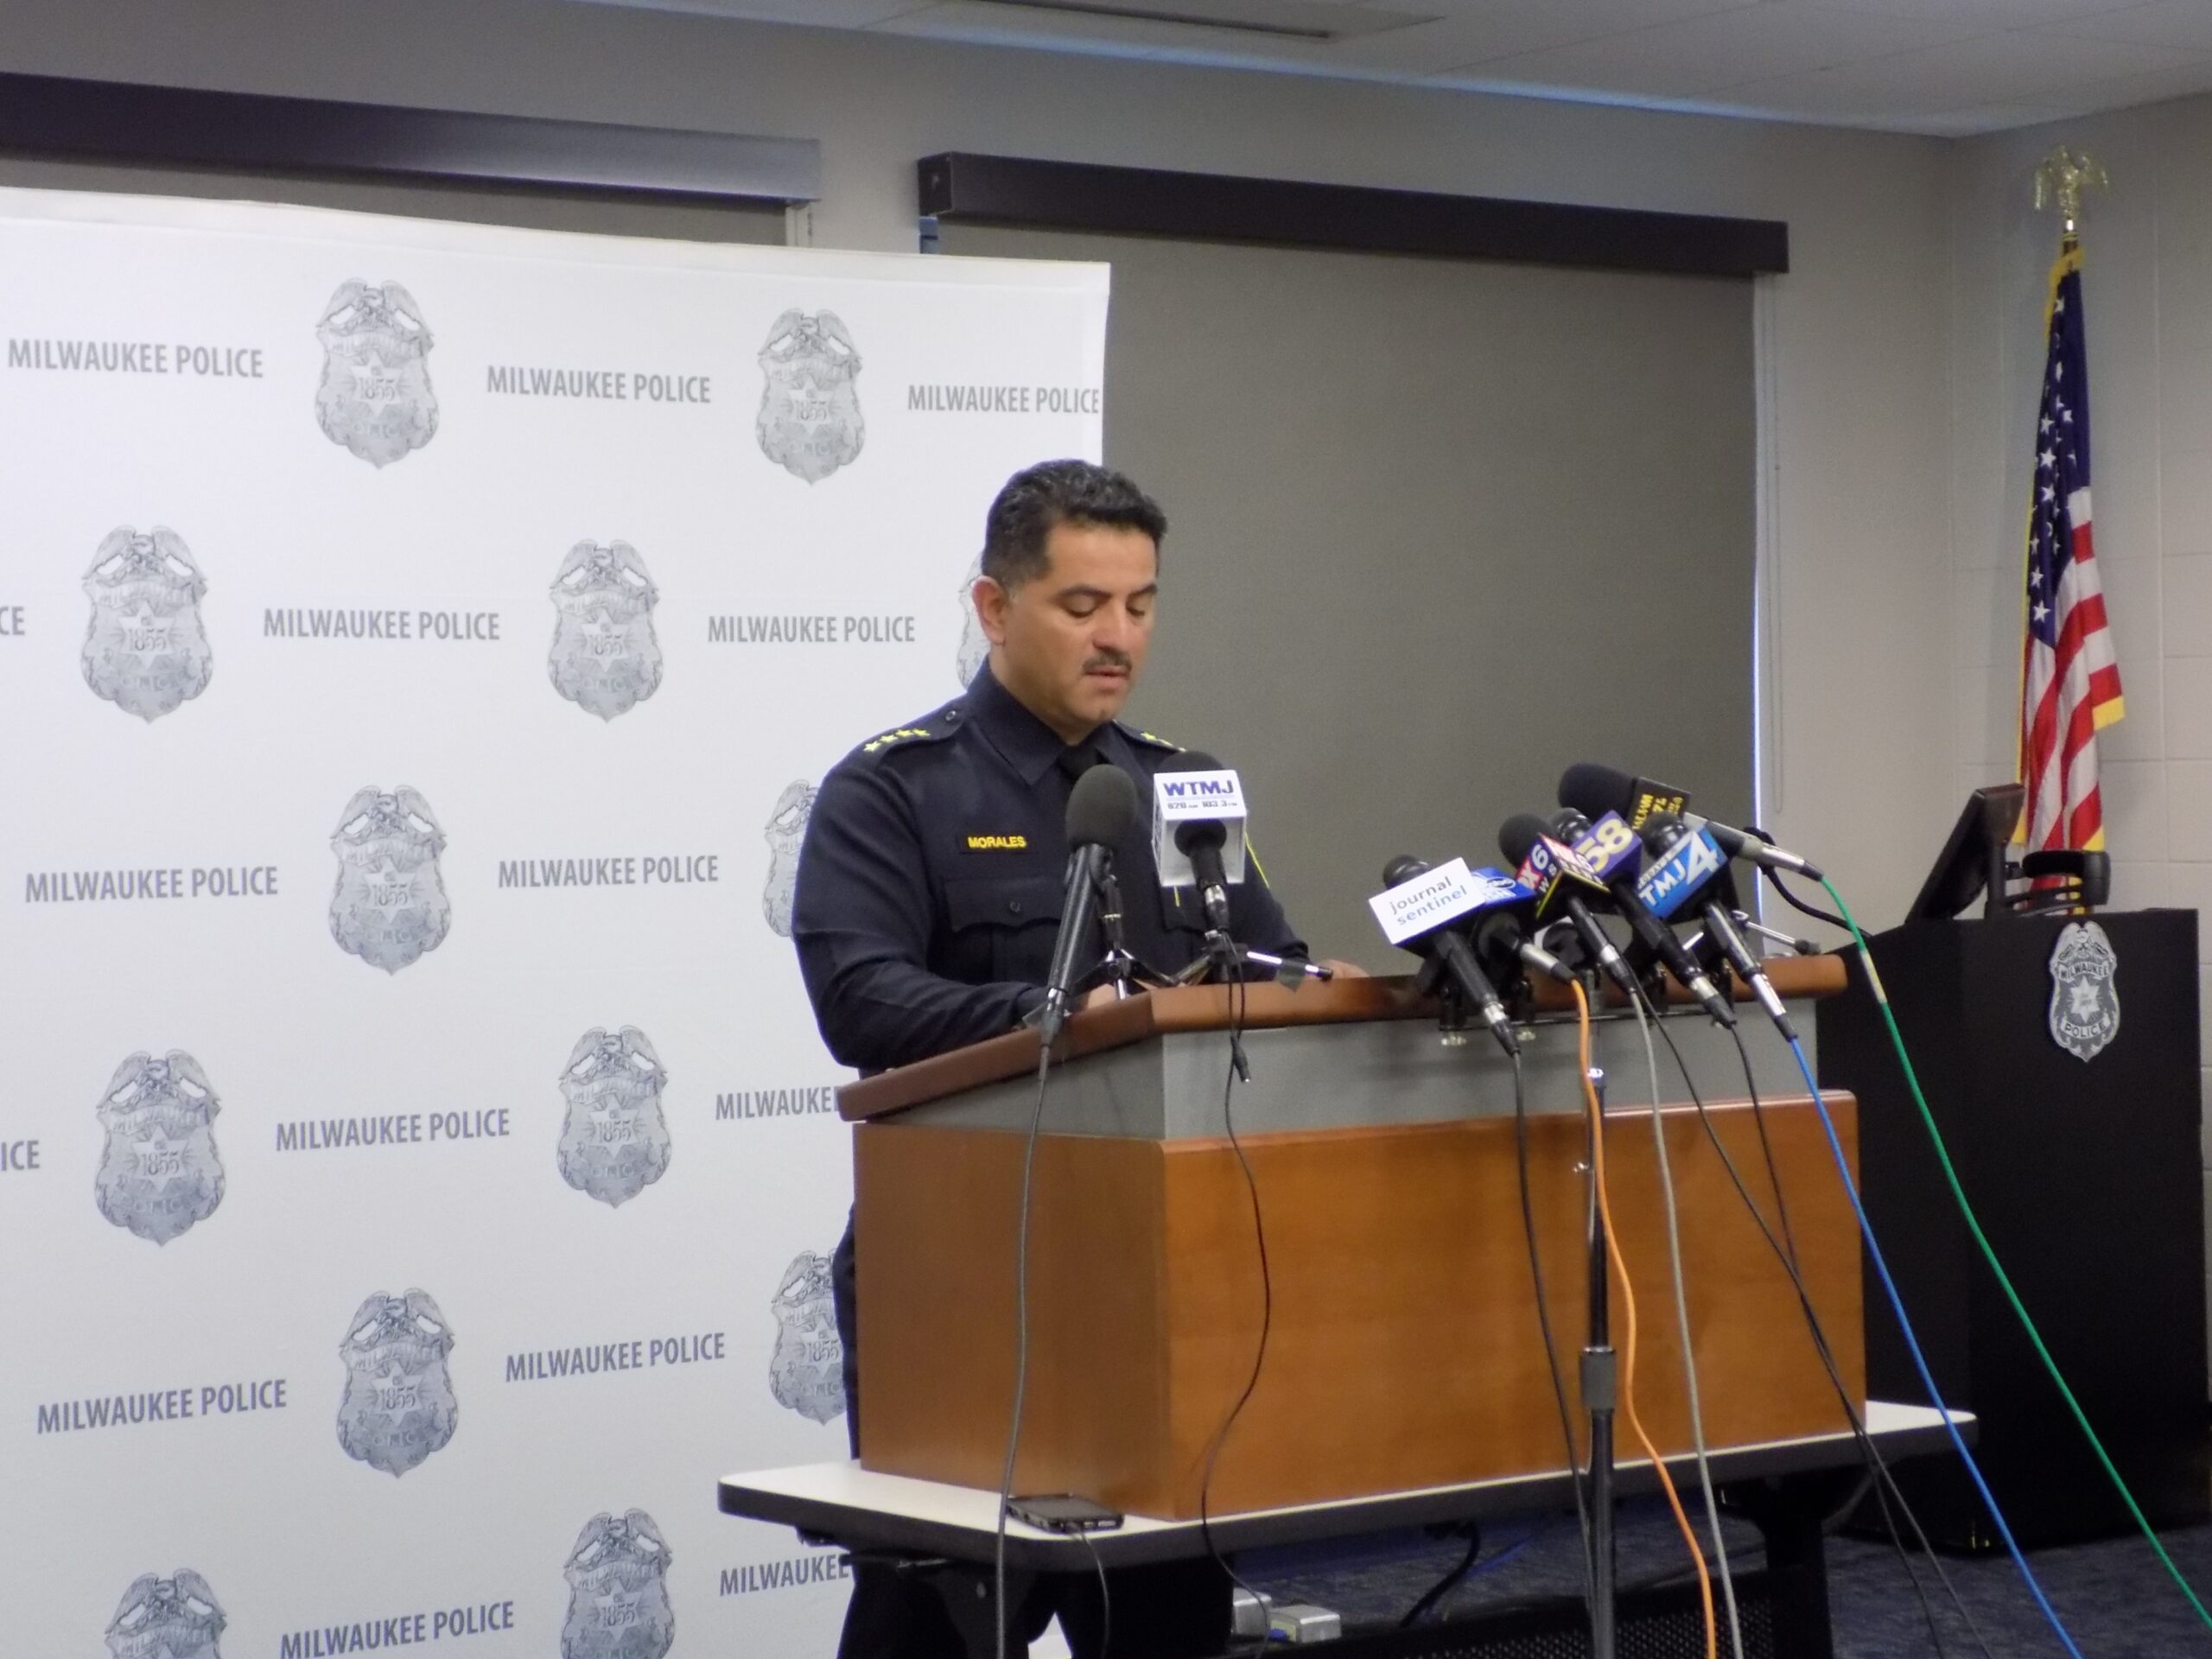 Report: Former Milwaukee Police Chief Alfonso Morales Denied Due Process With Demotion